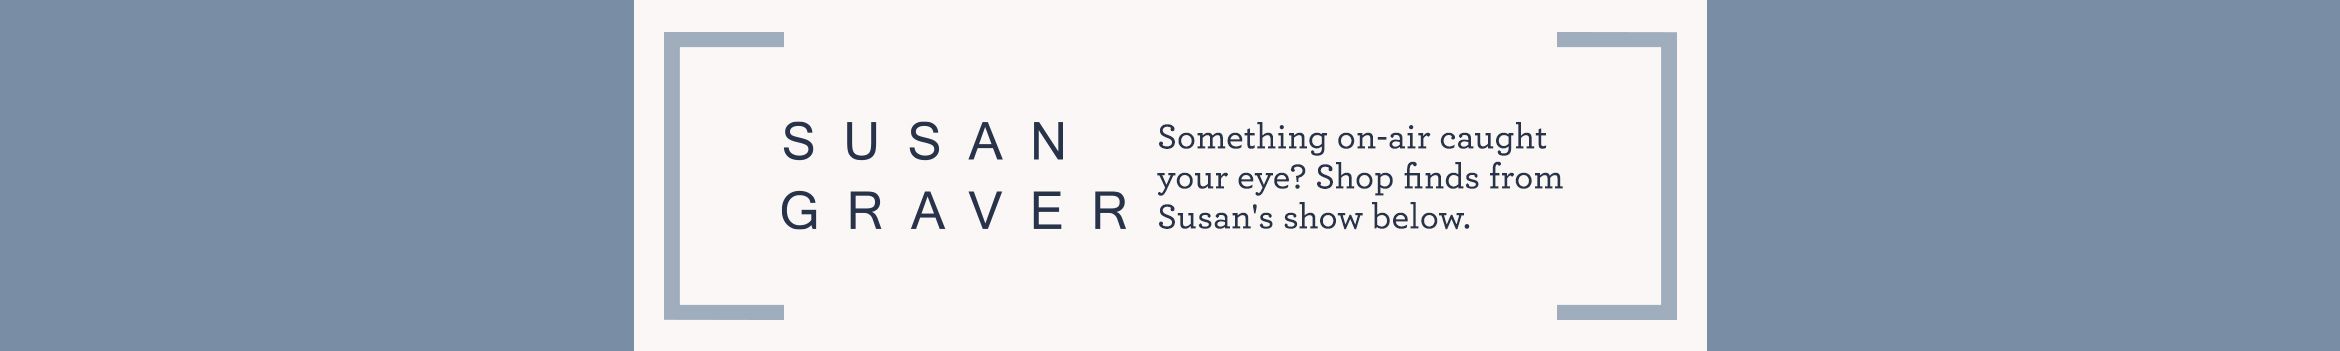 Susan Graver  Something on-air caught your eye? Shop finds from Susan's show below.